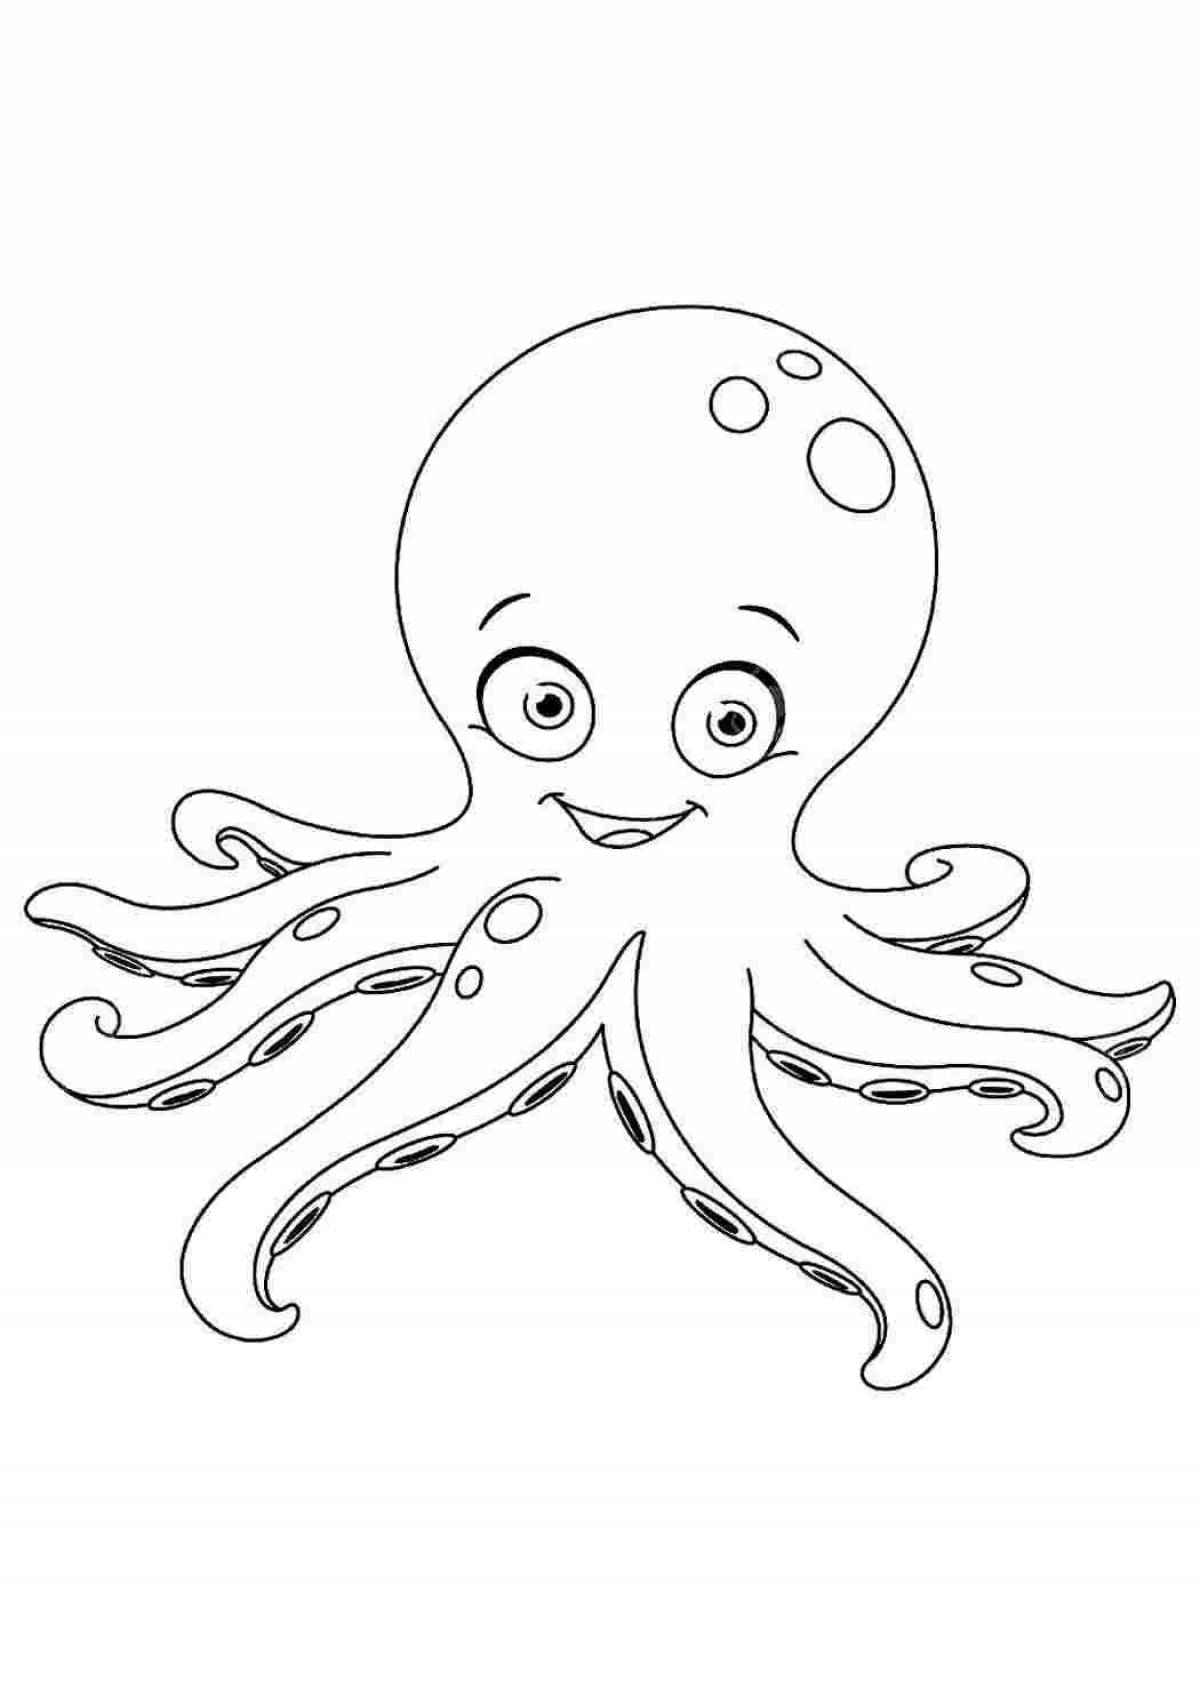 Fancy octopus coloring for kids